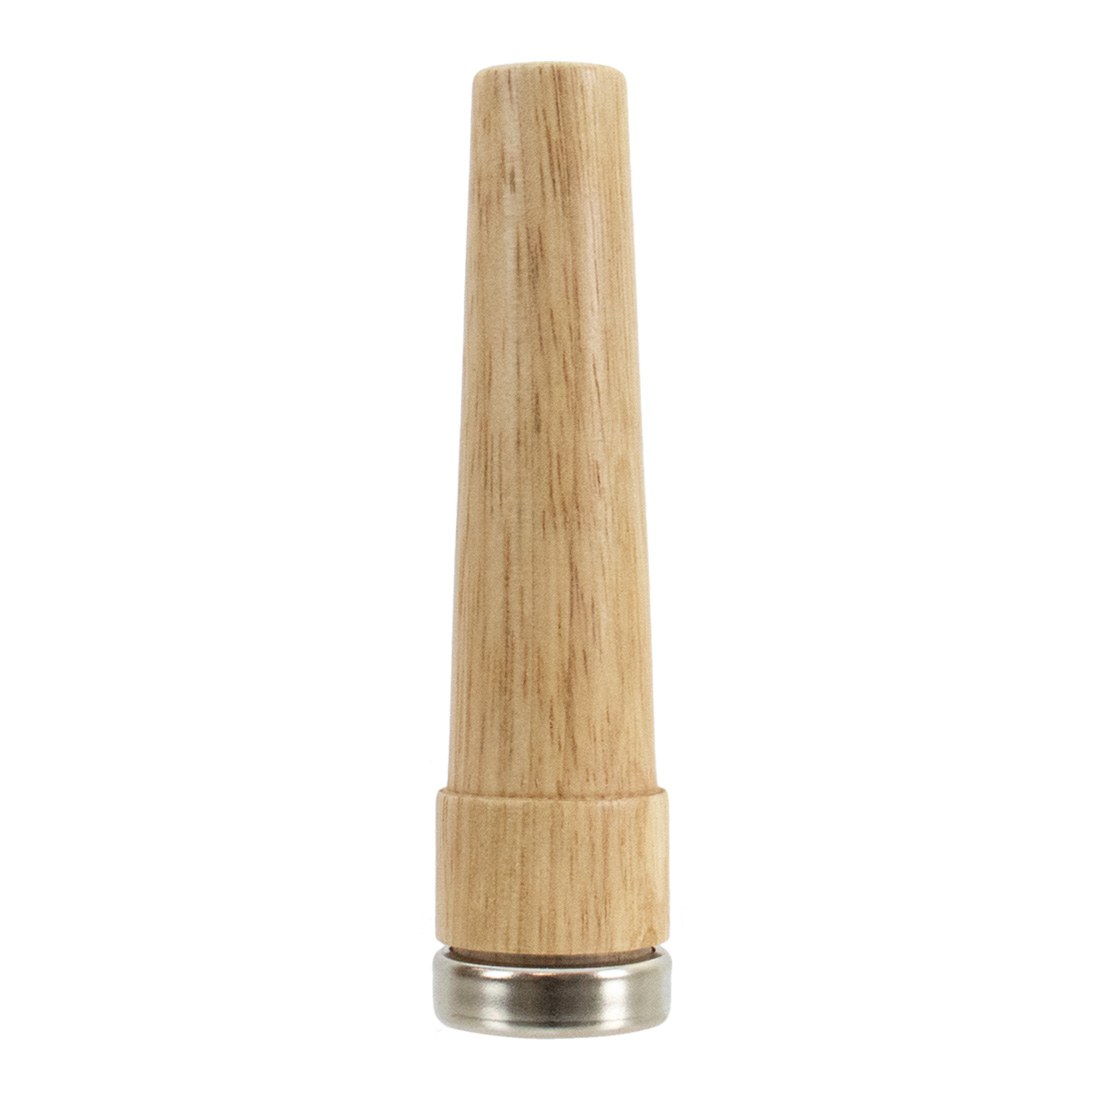 Unger Threaded Wood Cone Adapter - Main Product View